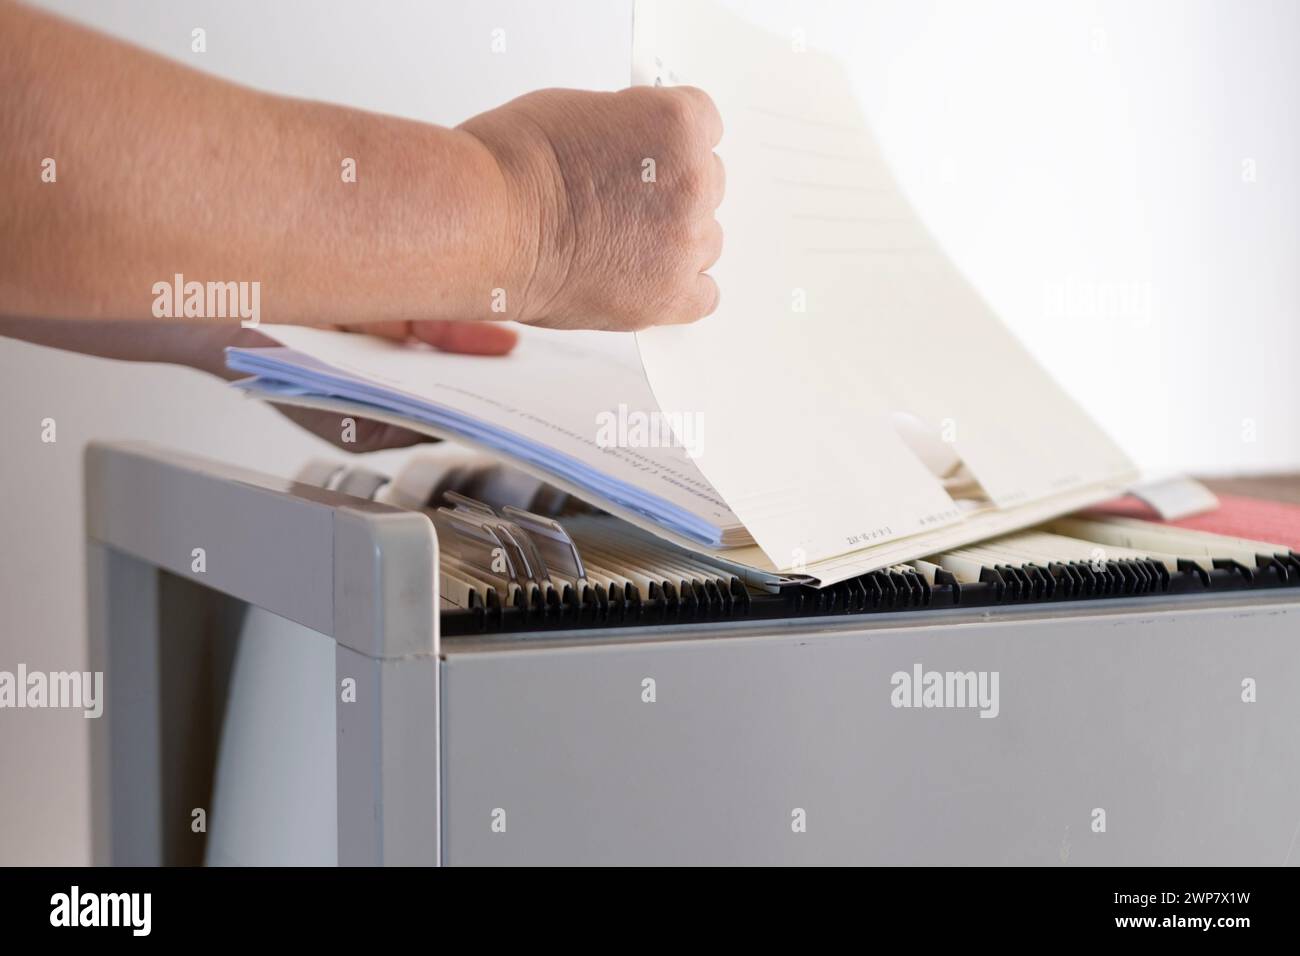 female hands through folders In Document Storage close-up, Home Archive, Record Keeping, Information Retrieval, File Organization, Document Indexing, Stock Photo